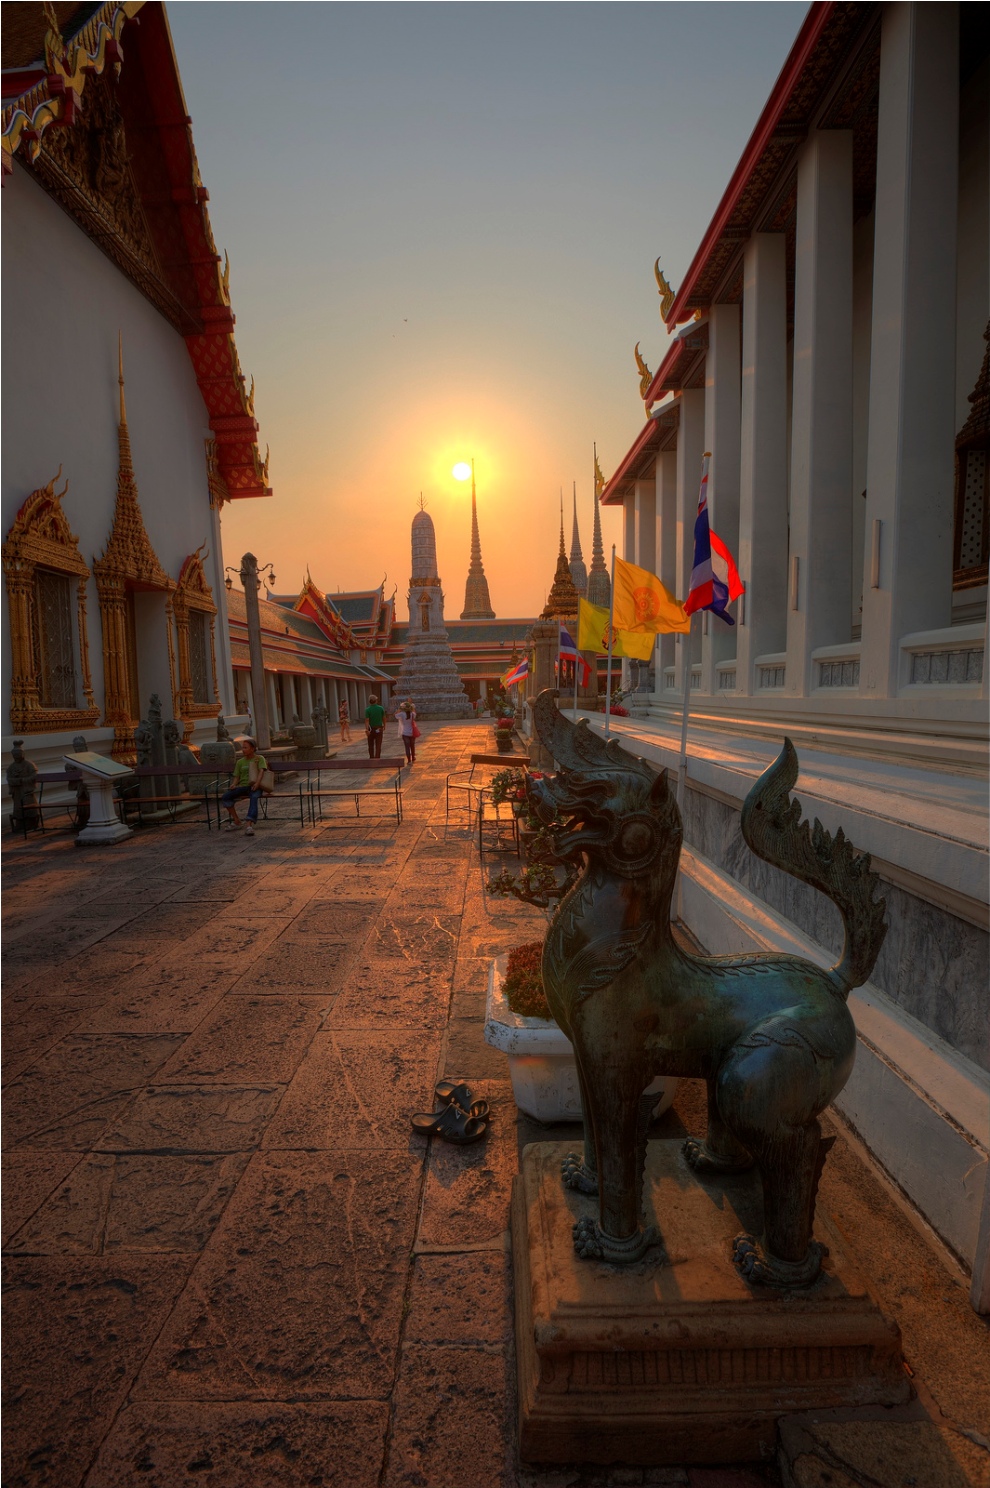 Wat Pho temple compound is also known as the birthplace of traditional Thai massage.